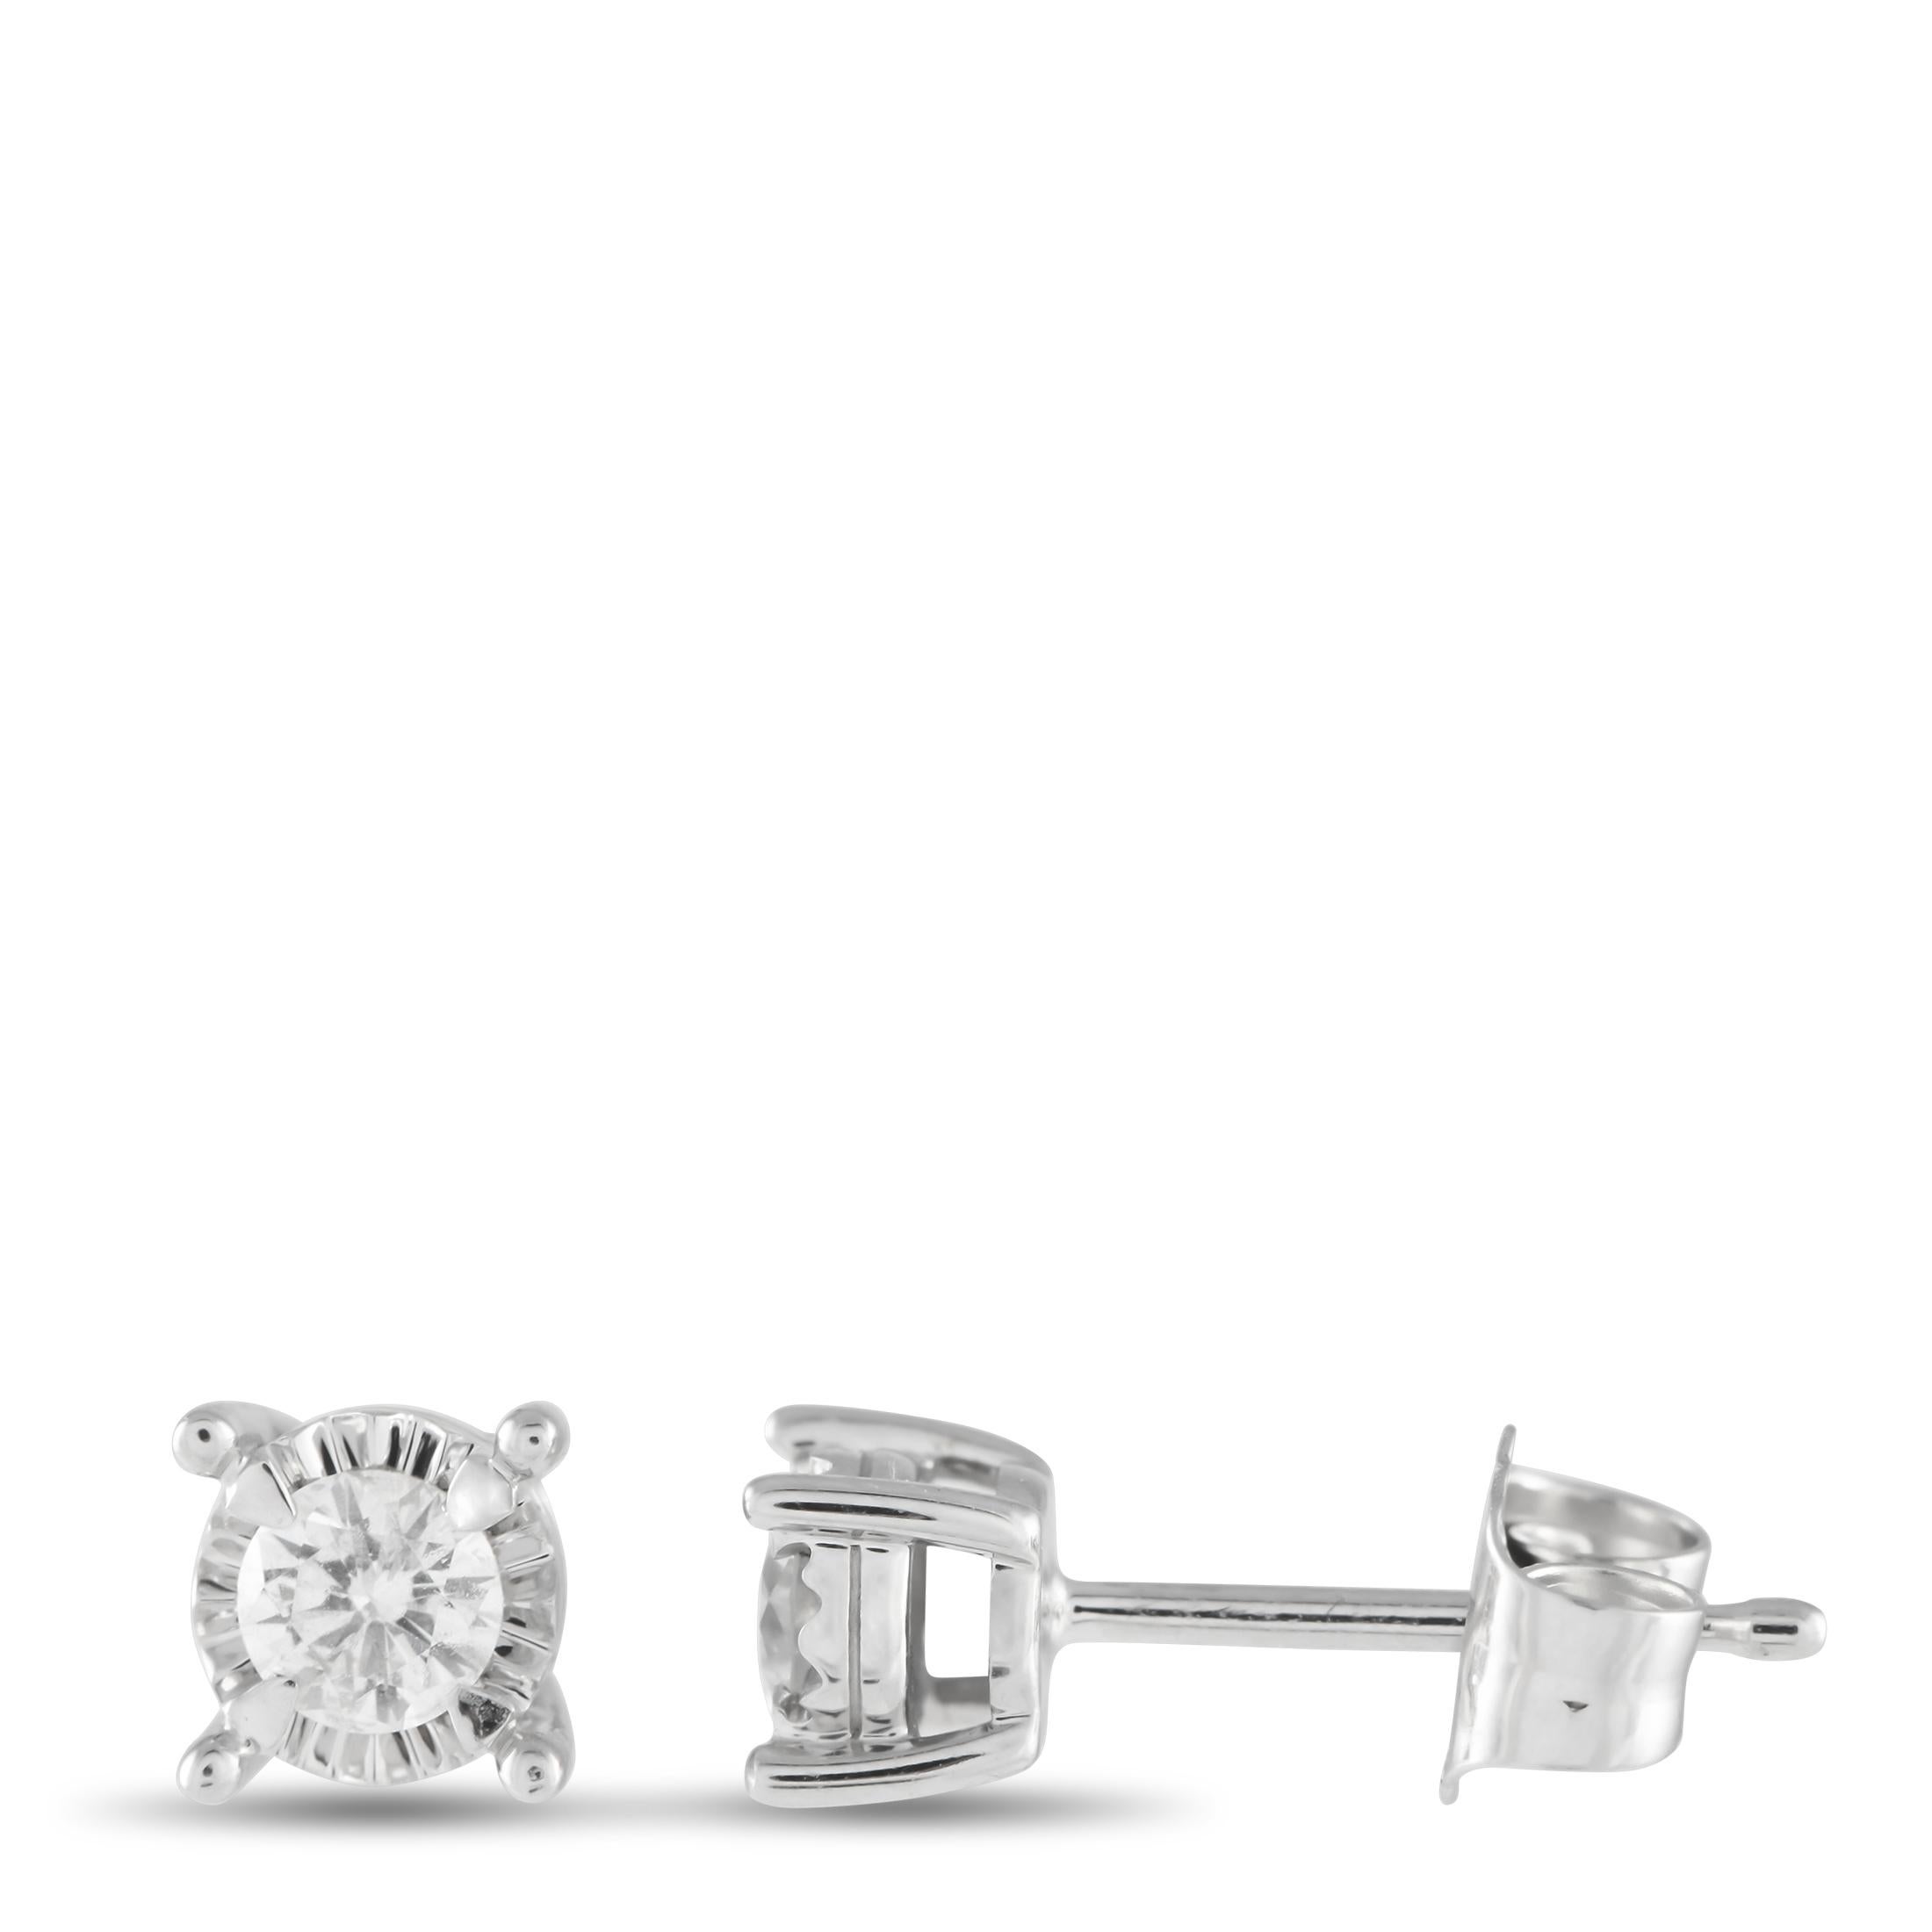 Simple Diamond solitaires shine brightly from their place within a textured 14K White Gold setting on these impeccably crafted earrings. The perfect way to add a touch of luxury to any occasion, together they possess a total wight of 0.14 carats.